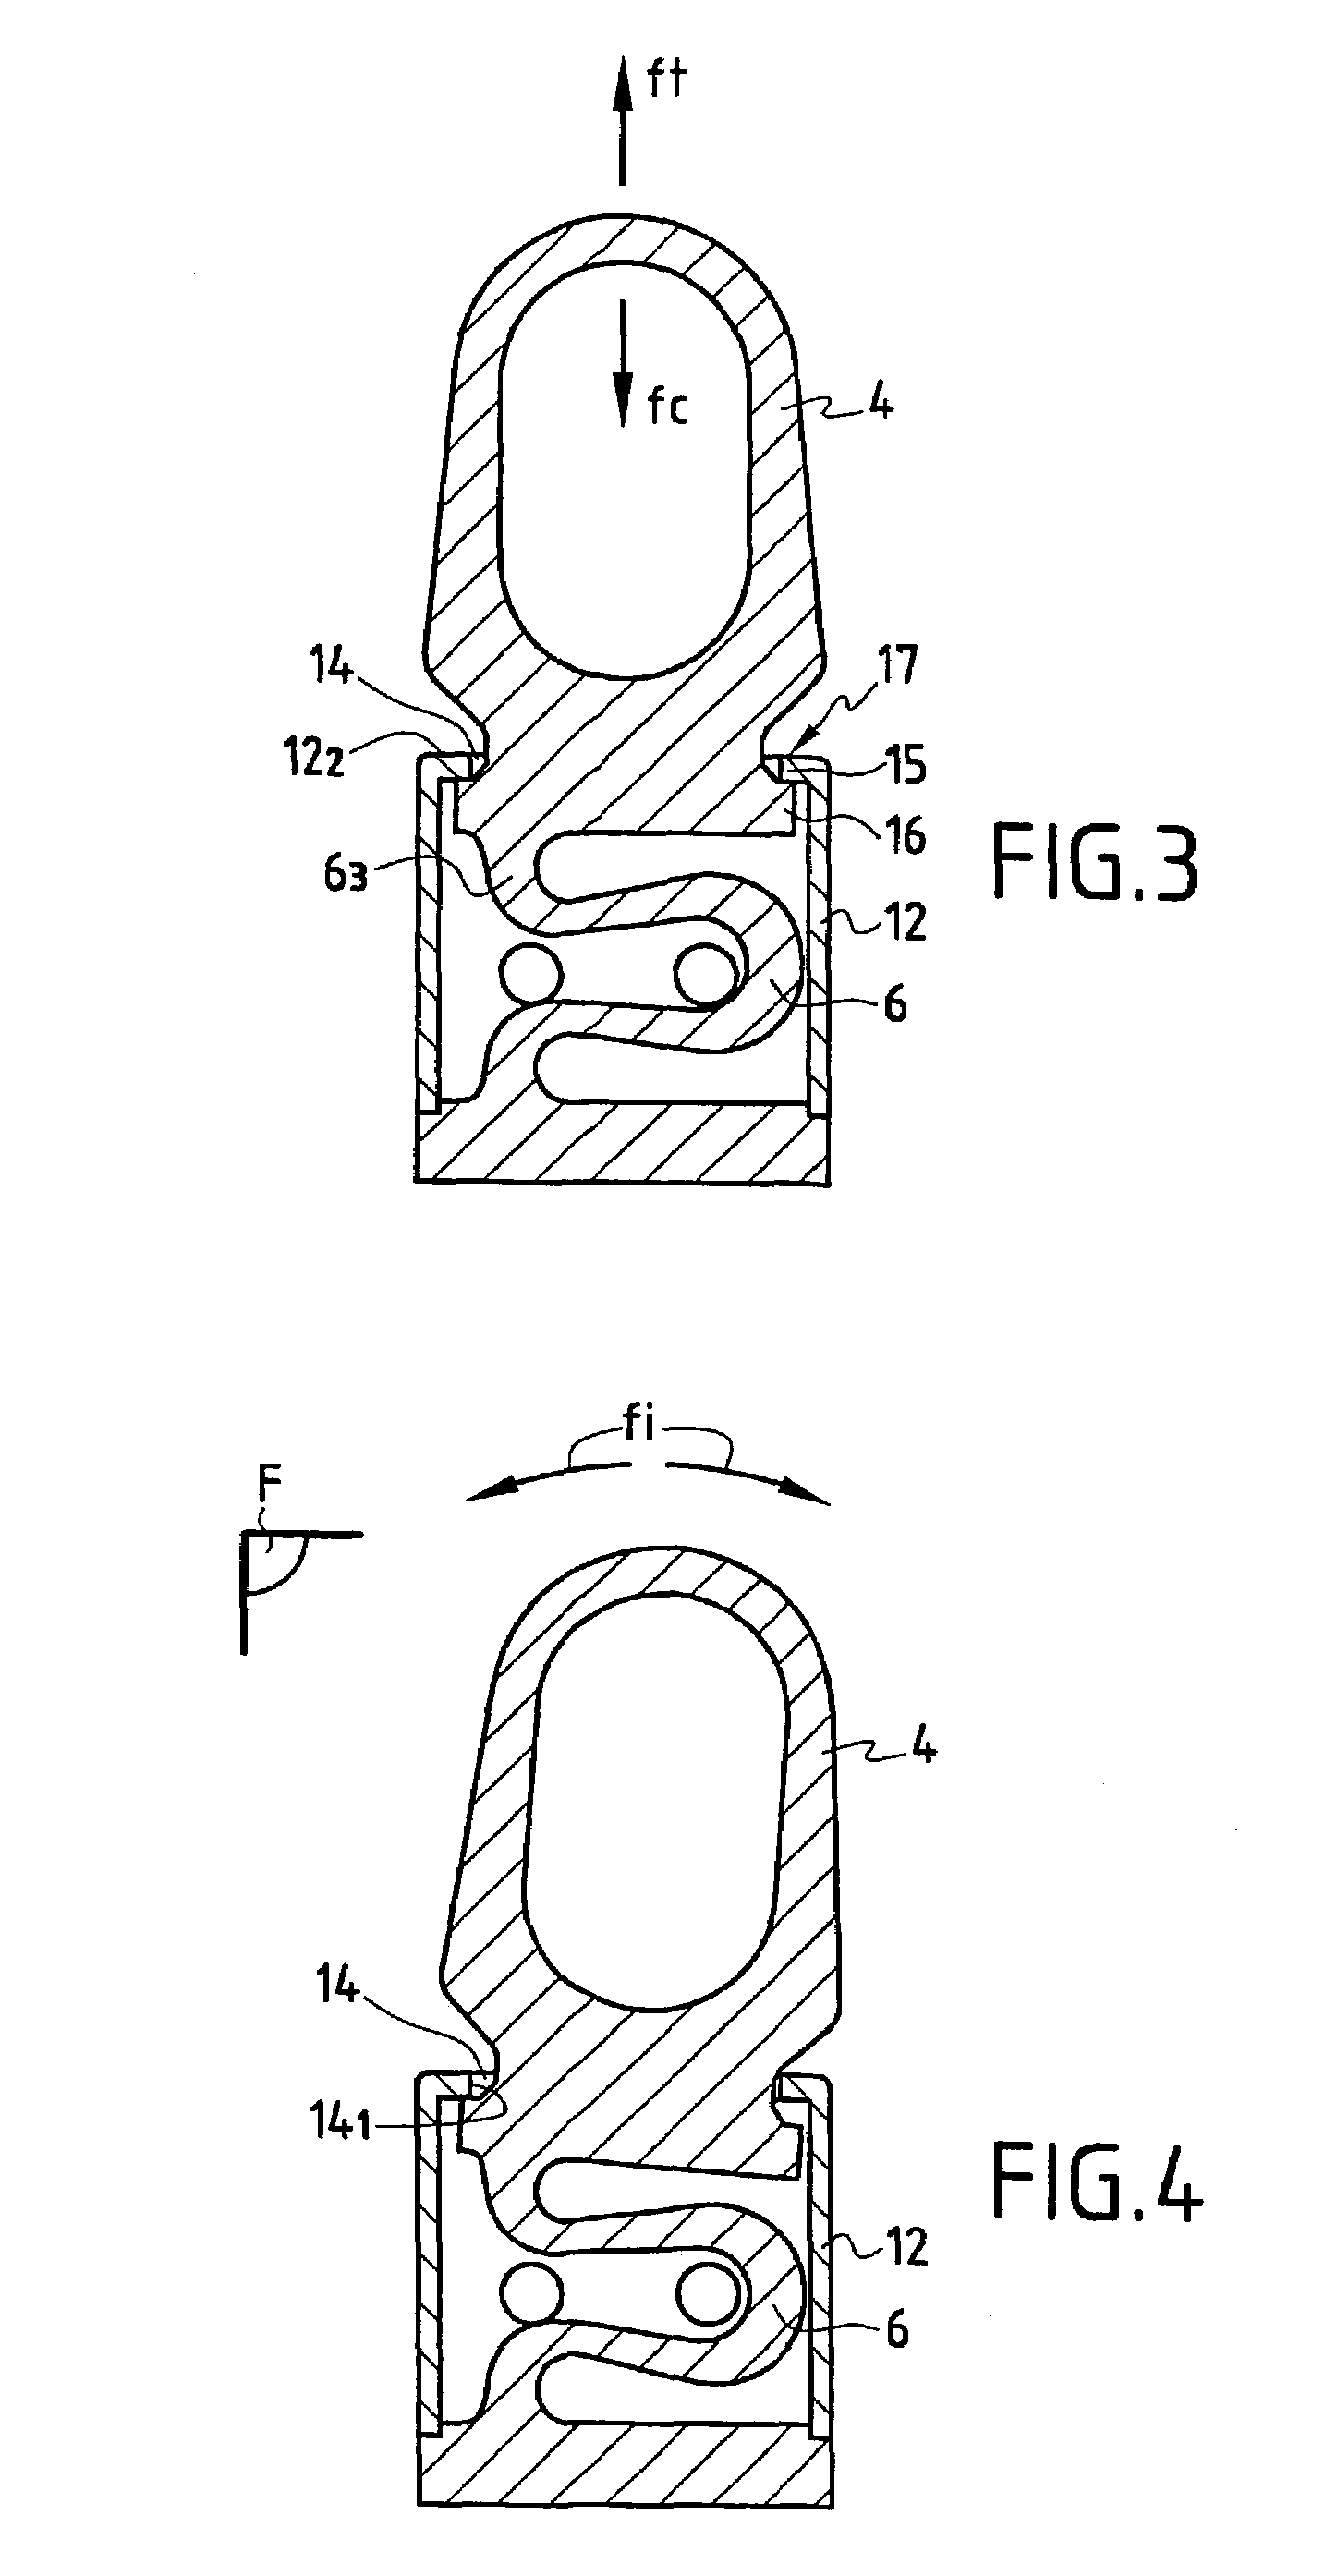 Dynamic intervertebral connection device with controlled multidirectional deflection